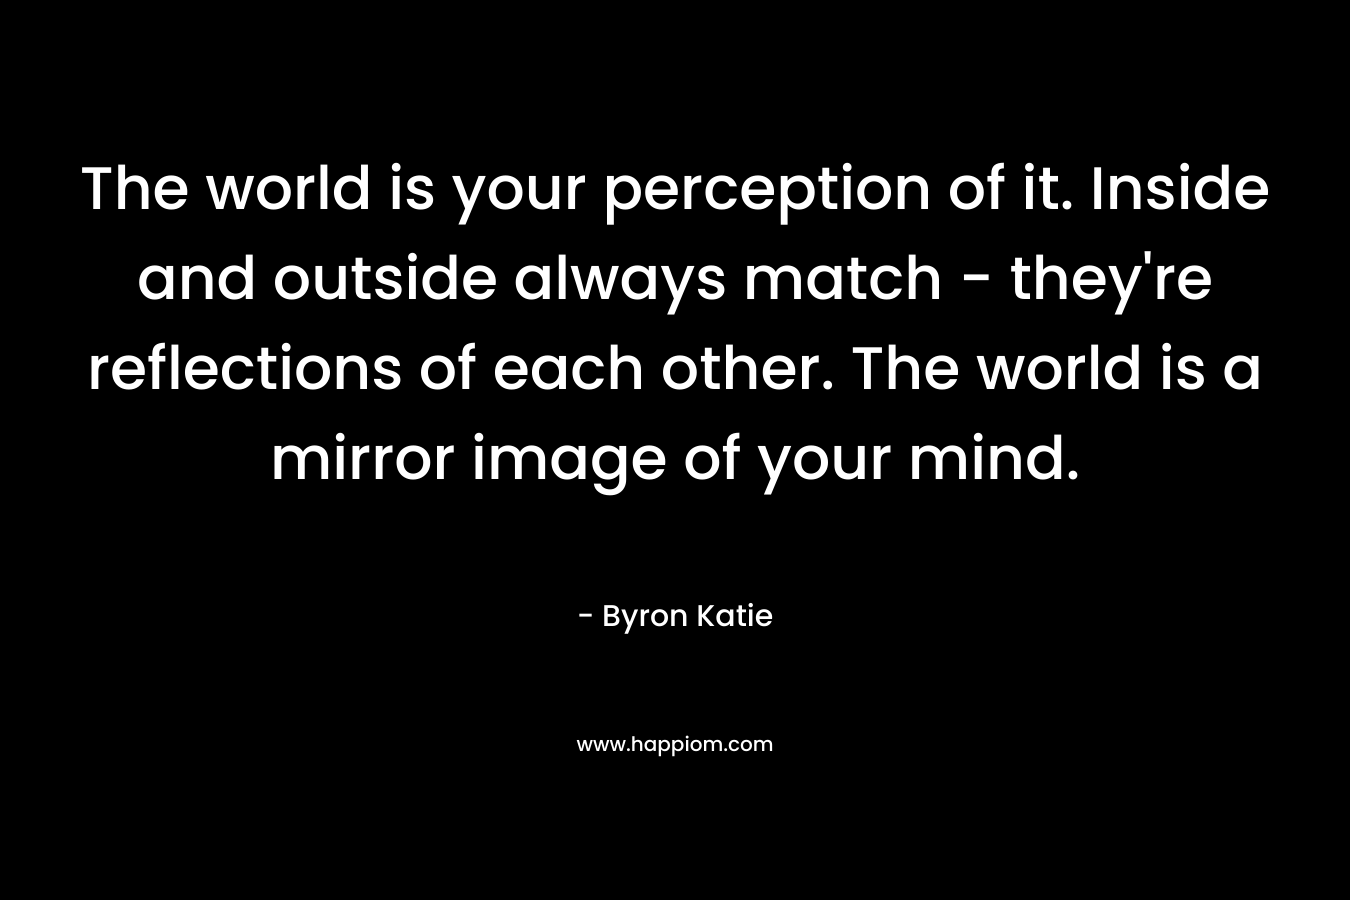 The world is your perception of it. Inside and outside always match - they're reflections of each other. The world is a mirror image of your mind.